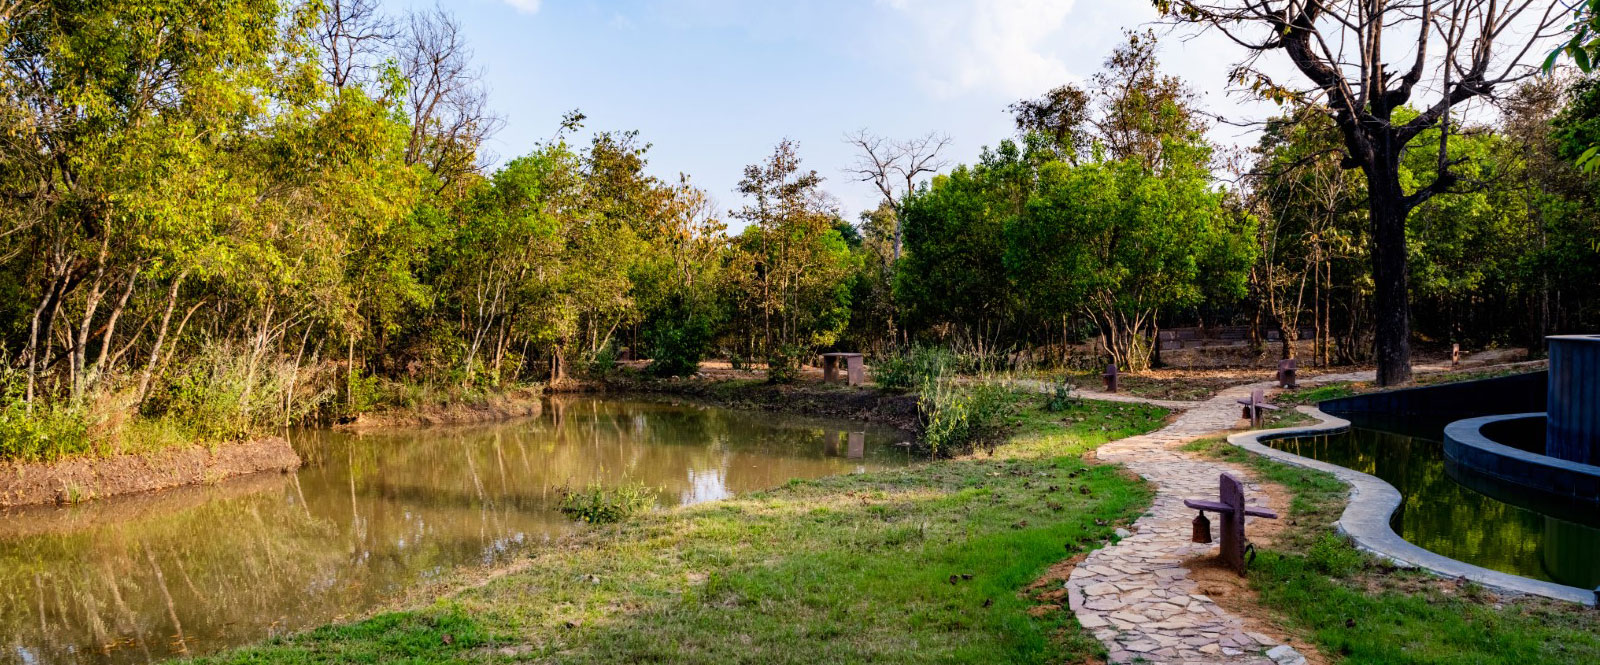 Hotels in pench national park